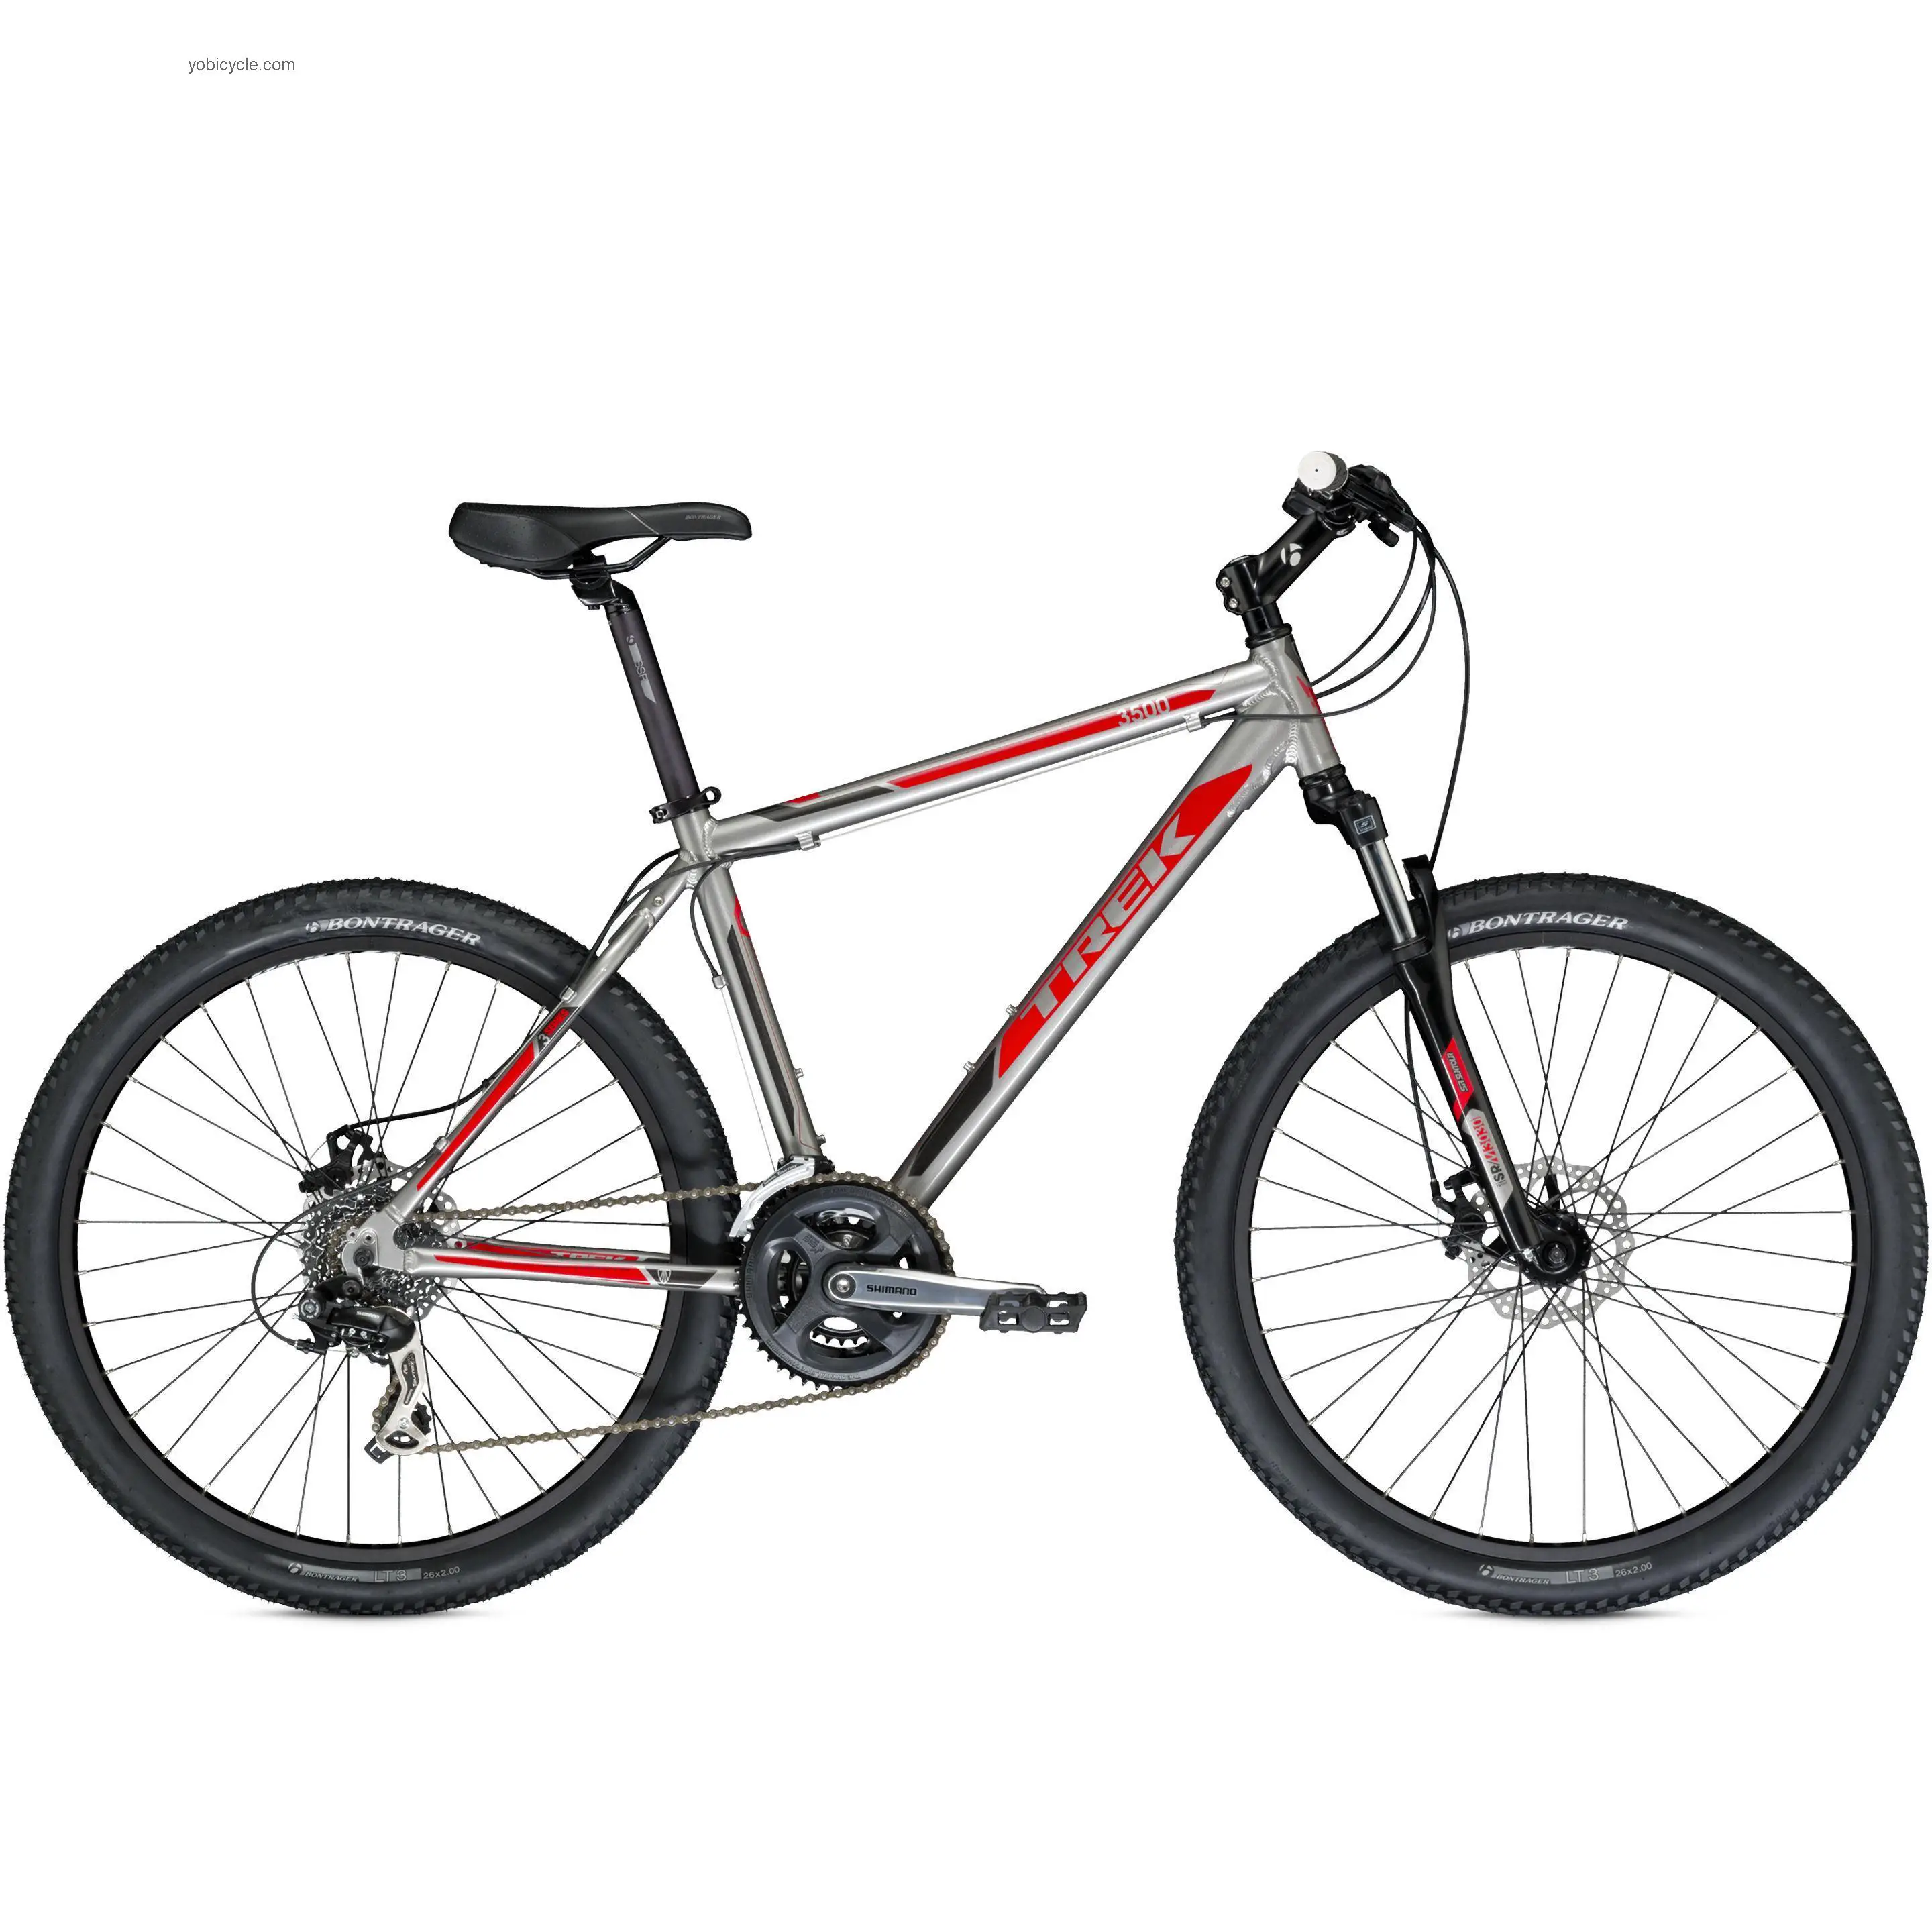 Trek 3500 Disc competitors and comparison tool online specs and performance